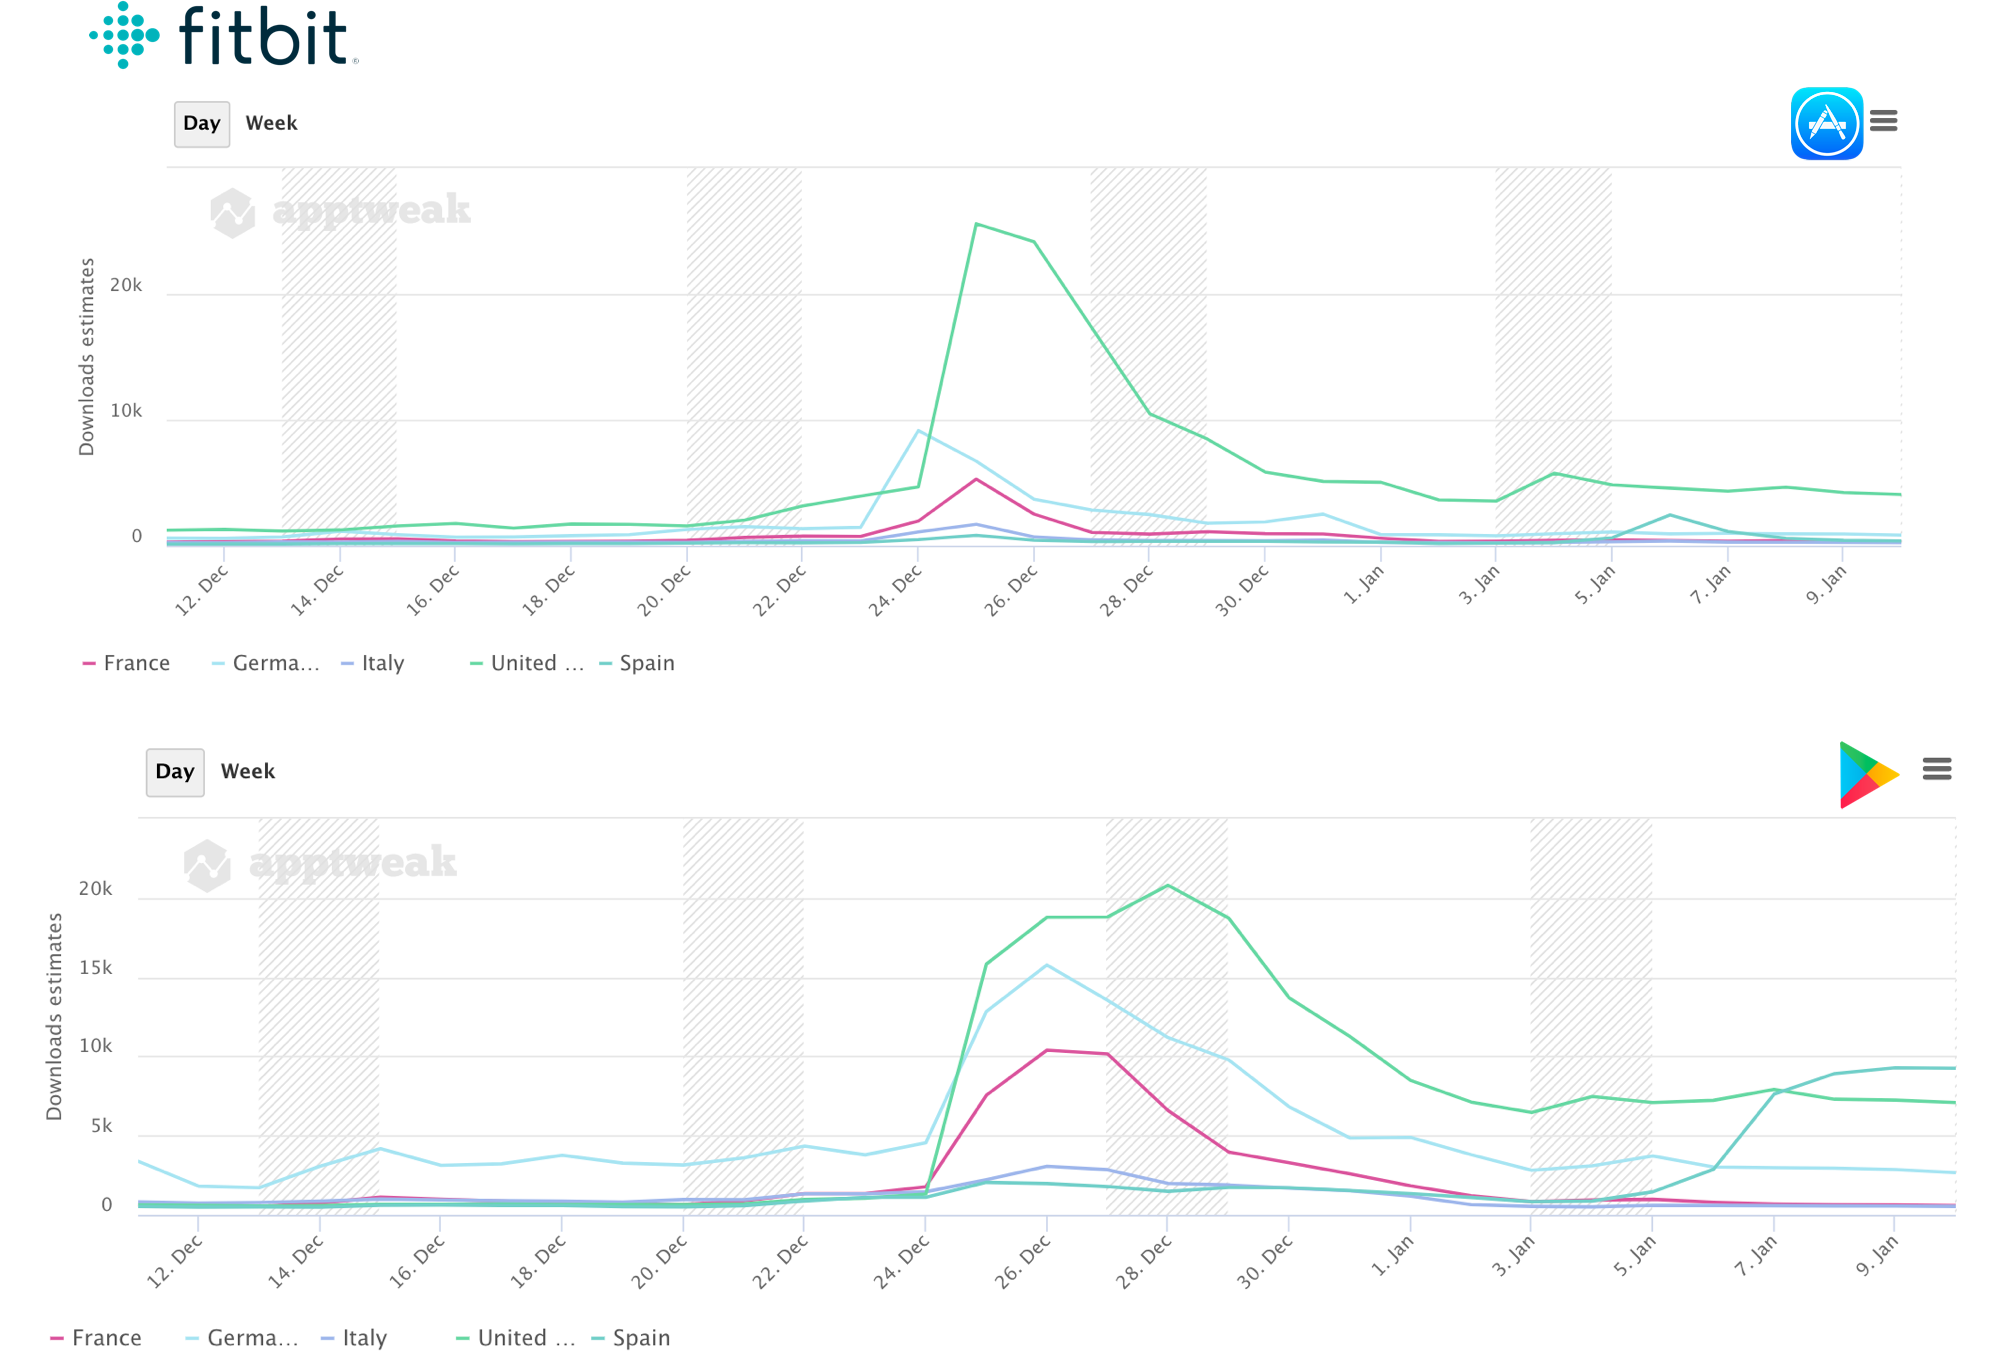 AppTweak App Intelligence - Comparing Fitbit’s peak in downloads across Stores and Countries.